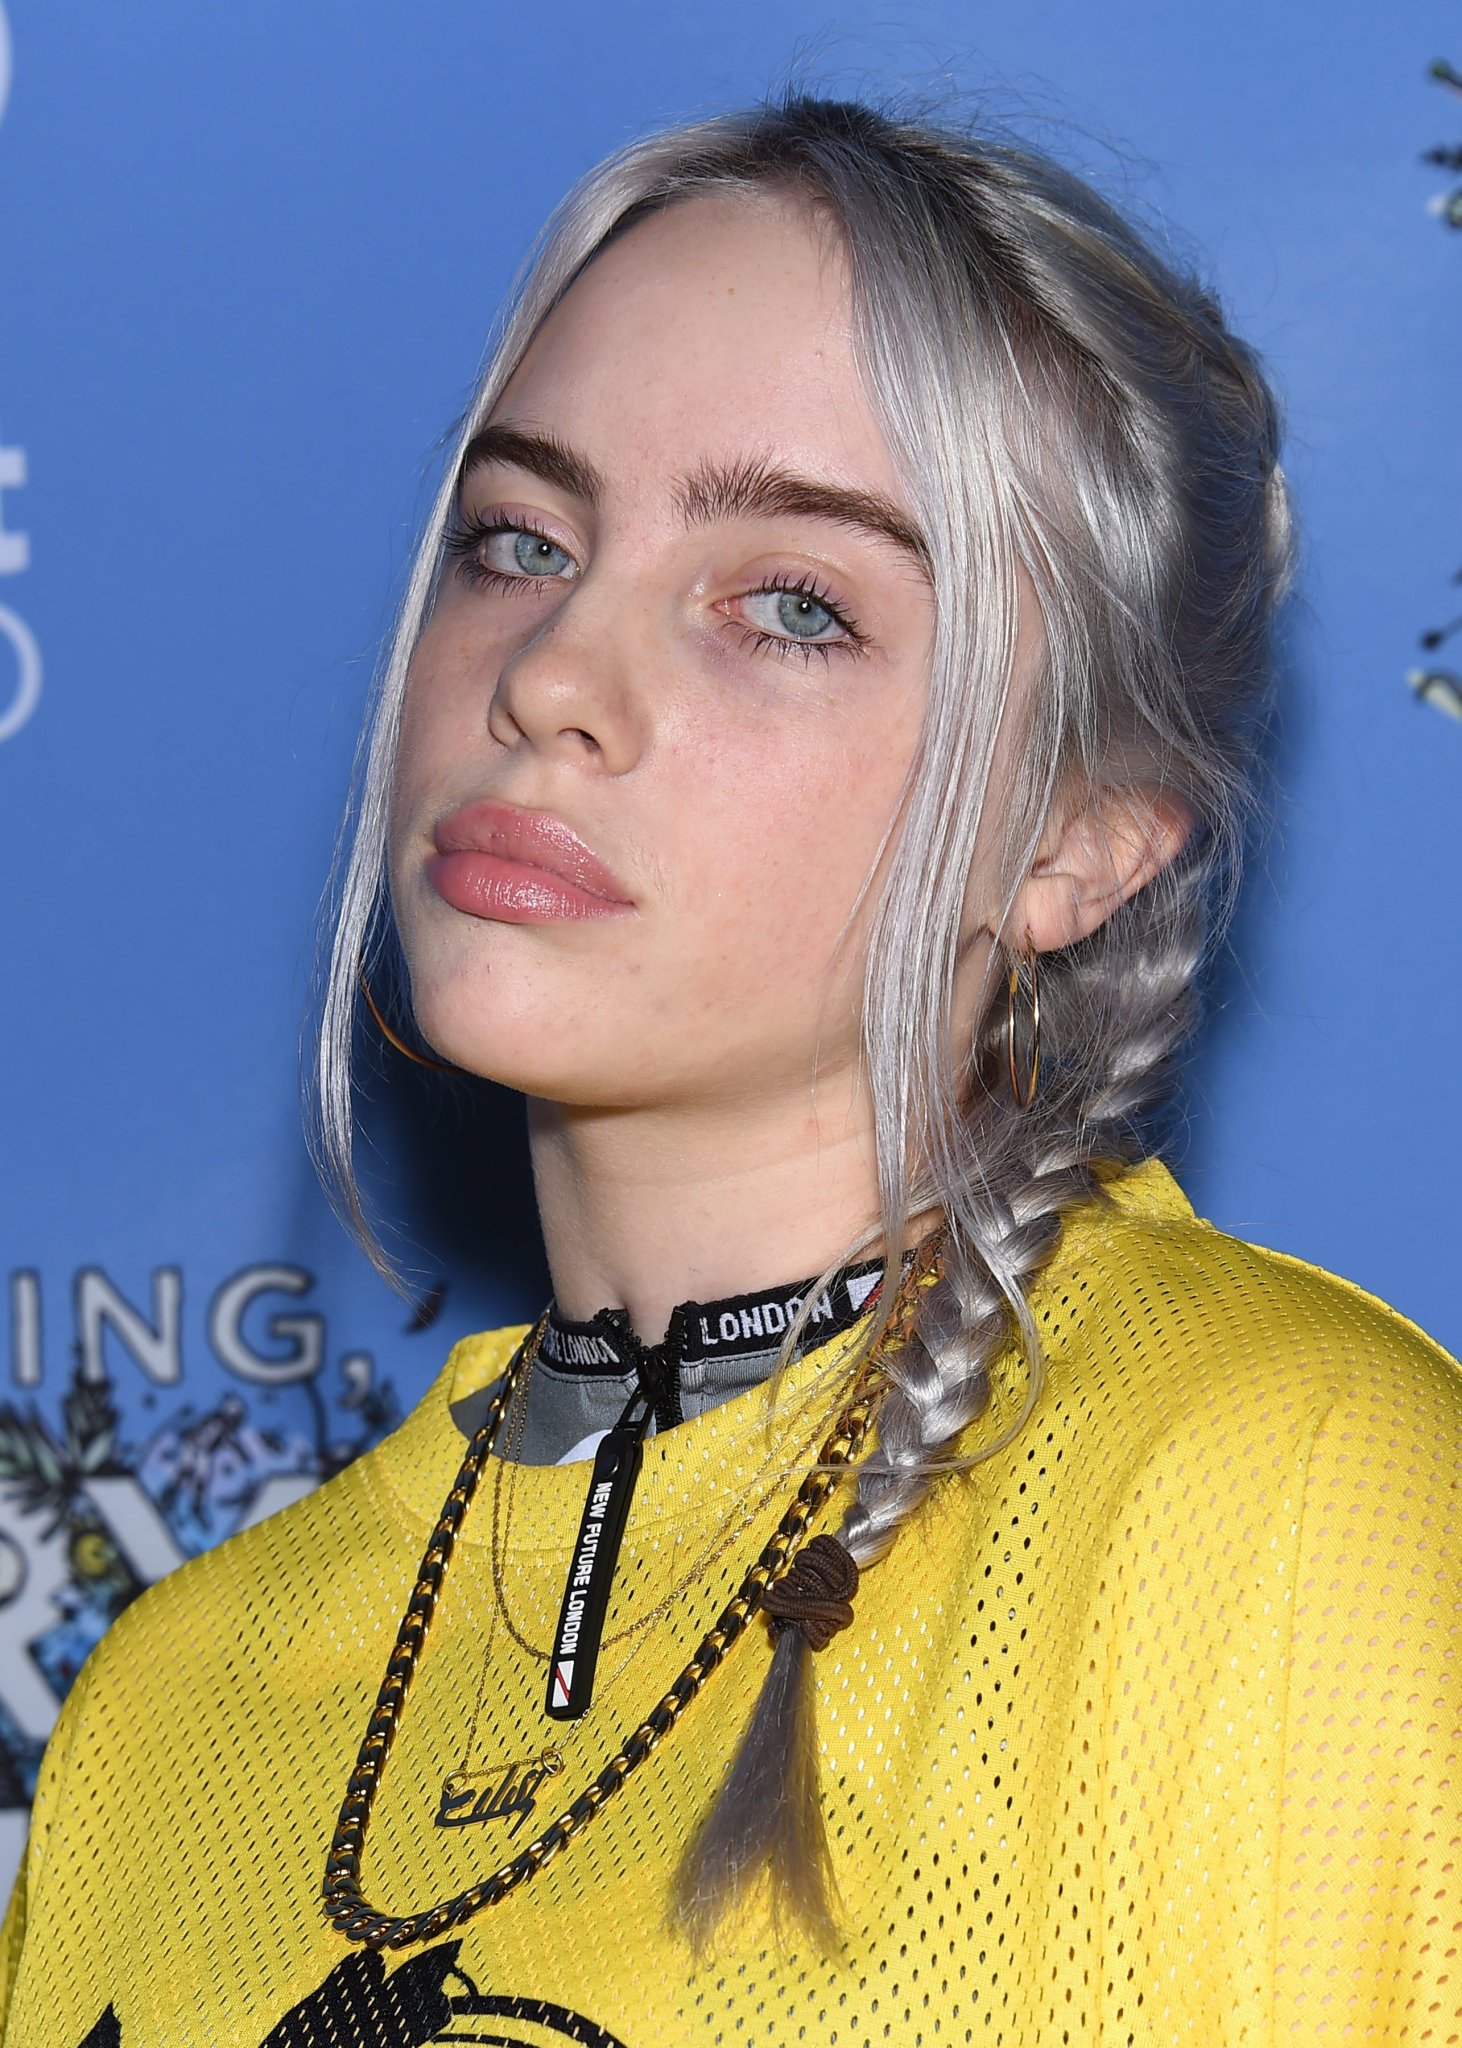 Billie Eilish Set To Record ‘No Time To Die’ Theme Song